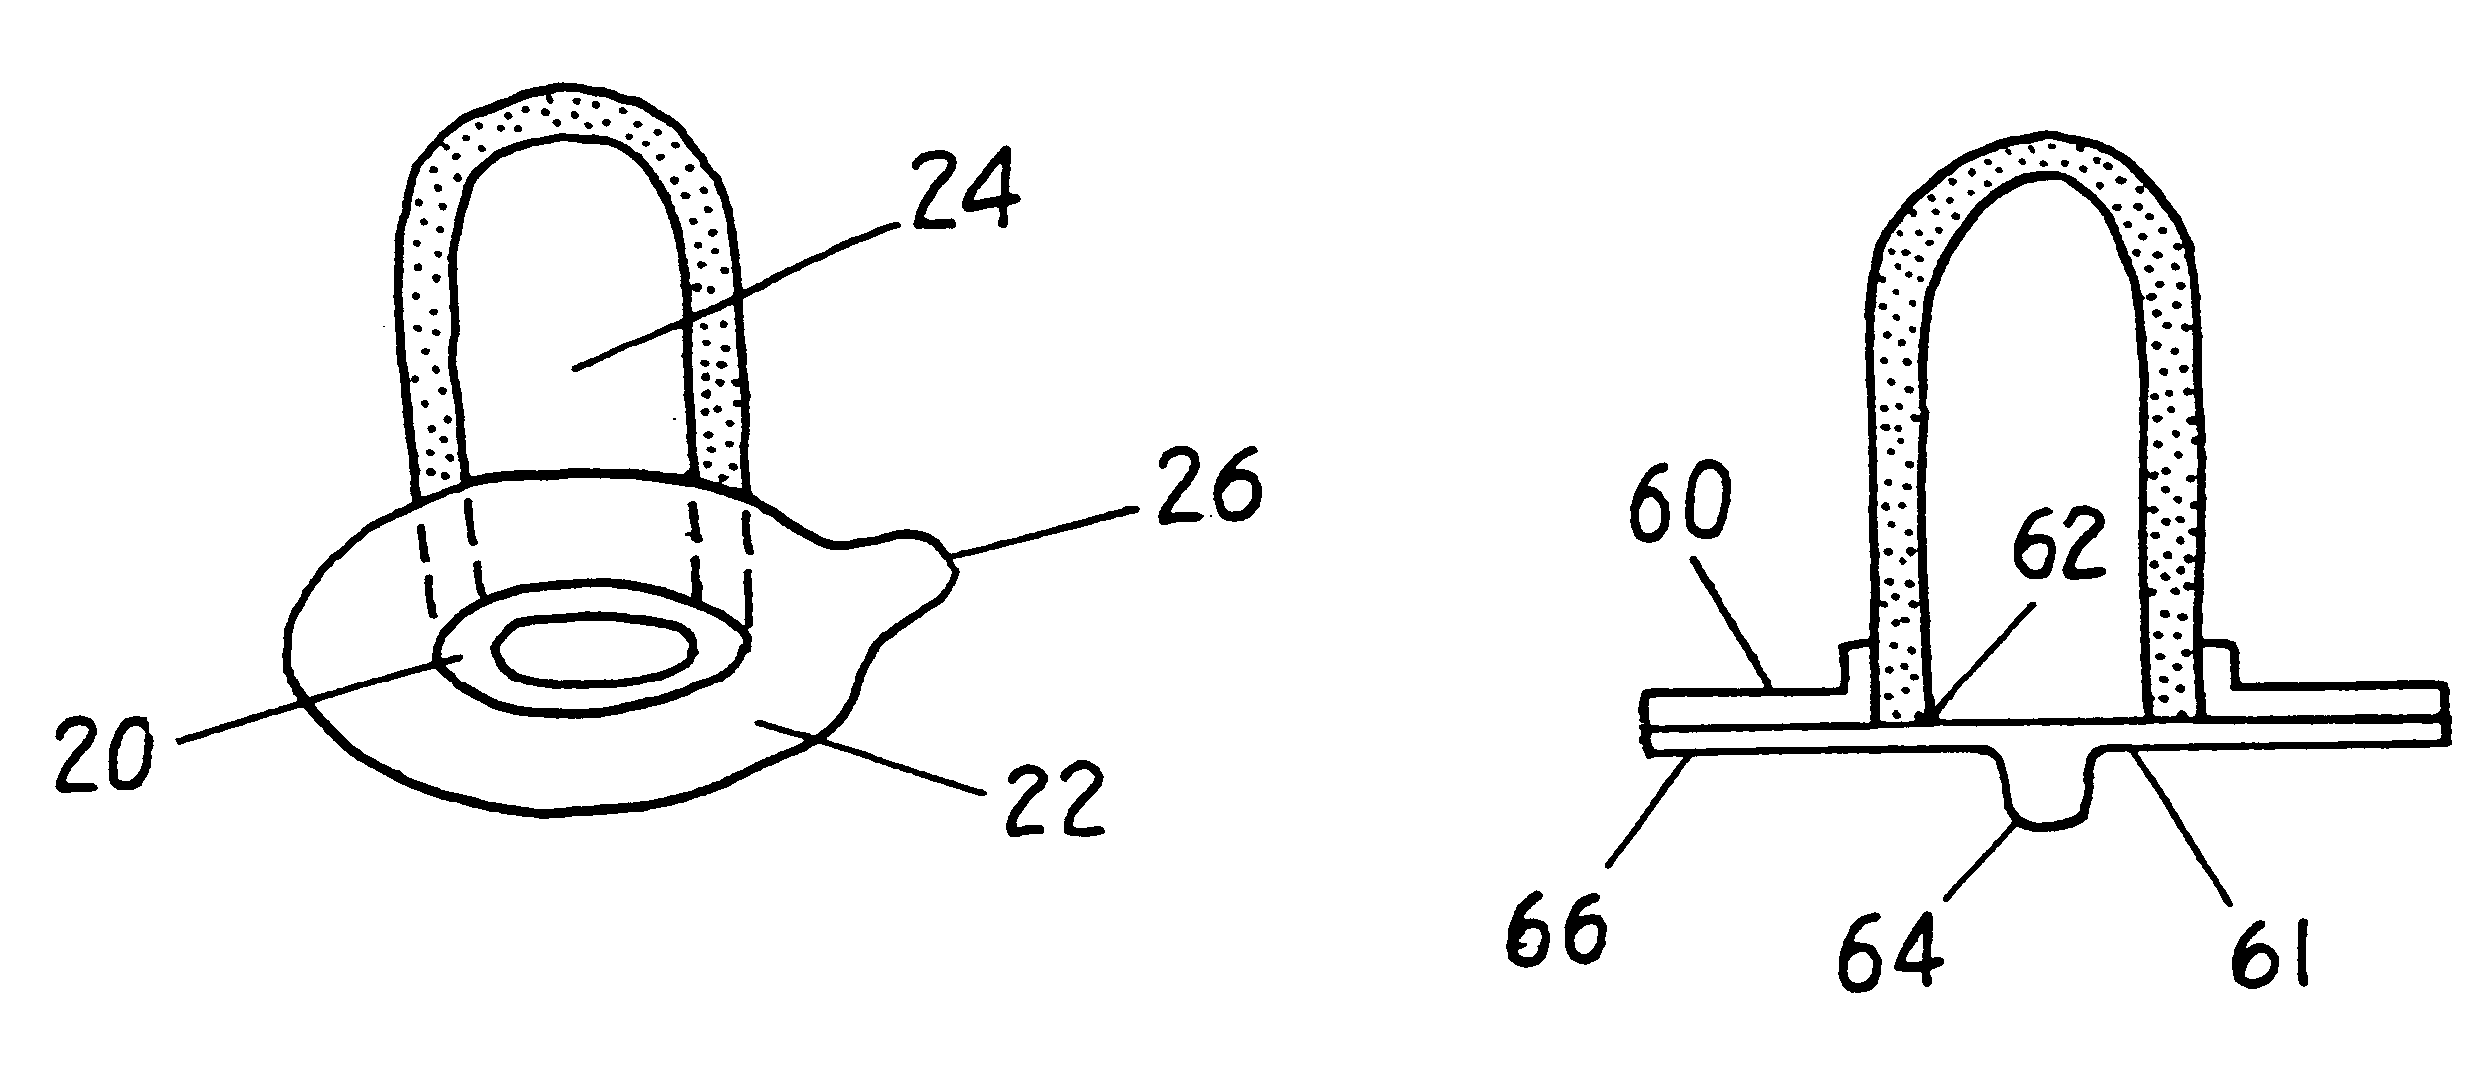 Thermal compress for appendage and method of treating appendage with thermal compress